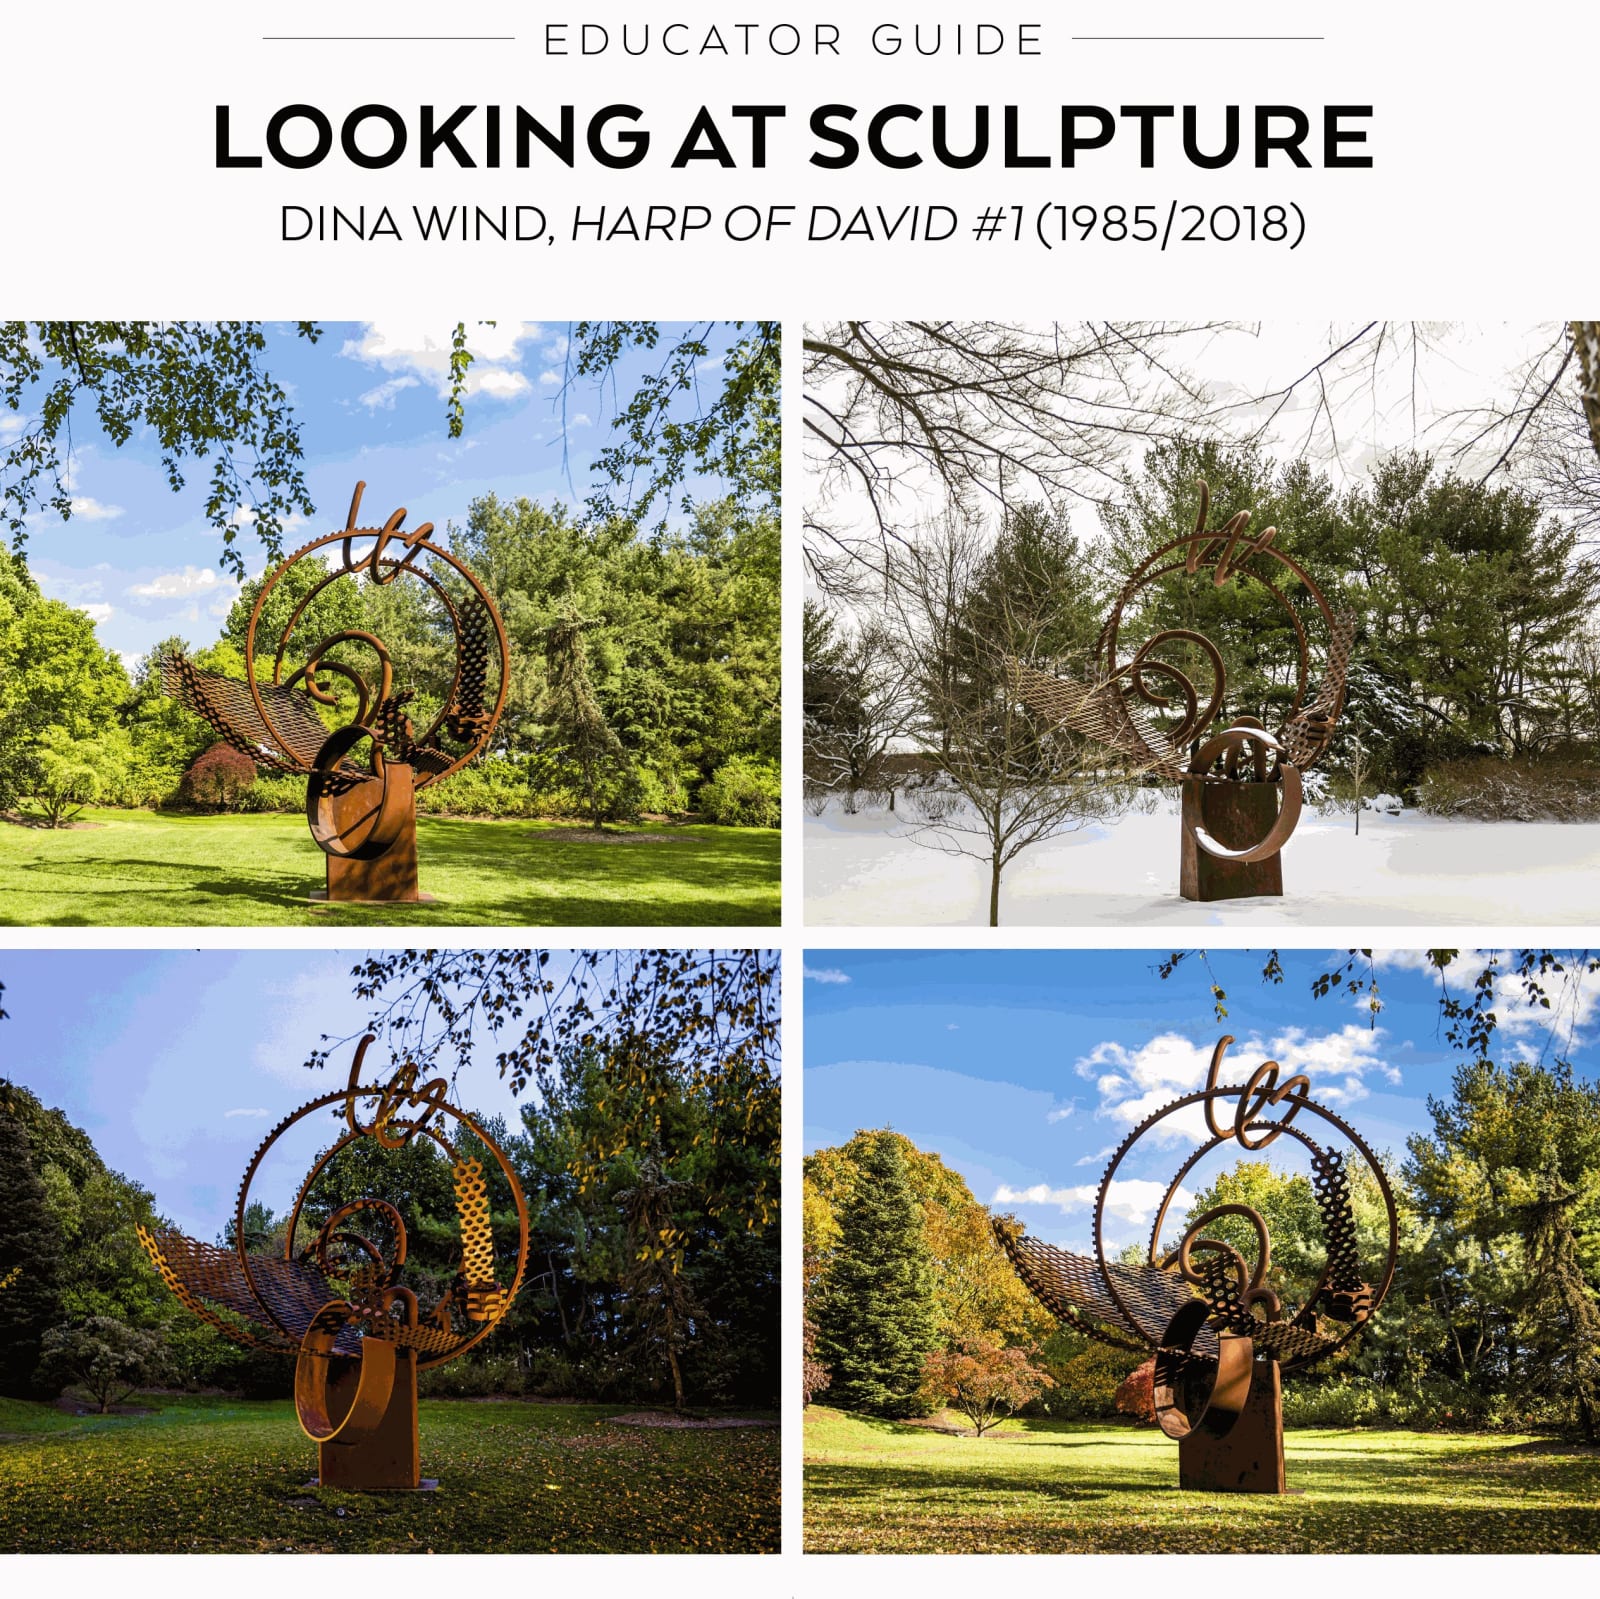 Grounds for Sculpture Educator Guide: Harp of David #1